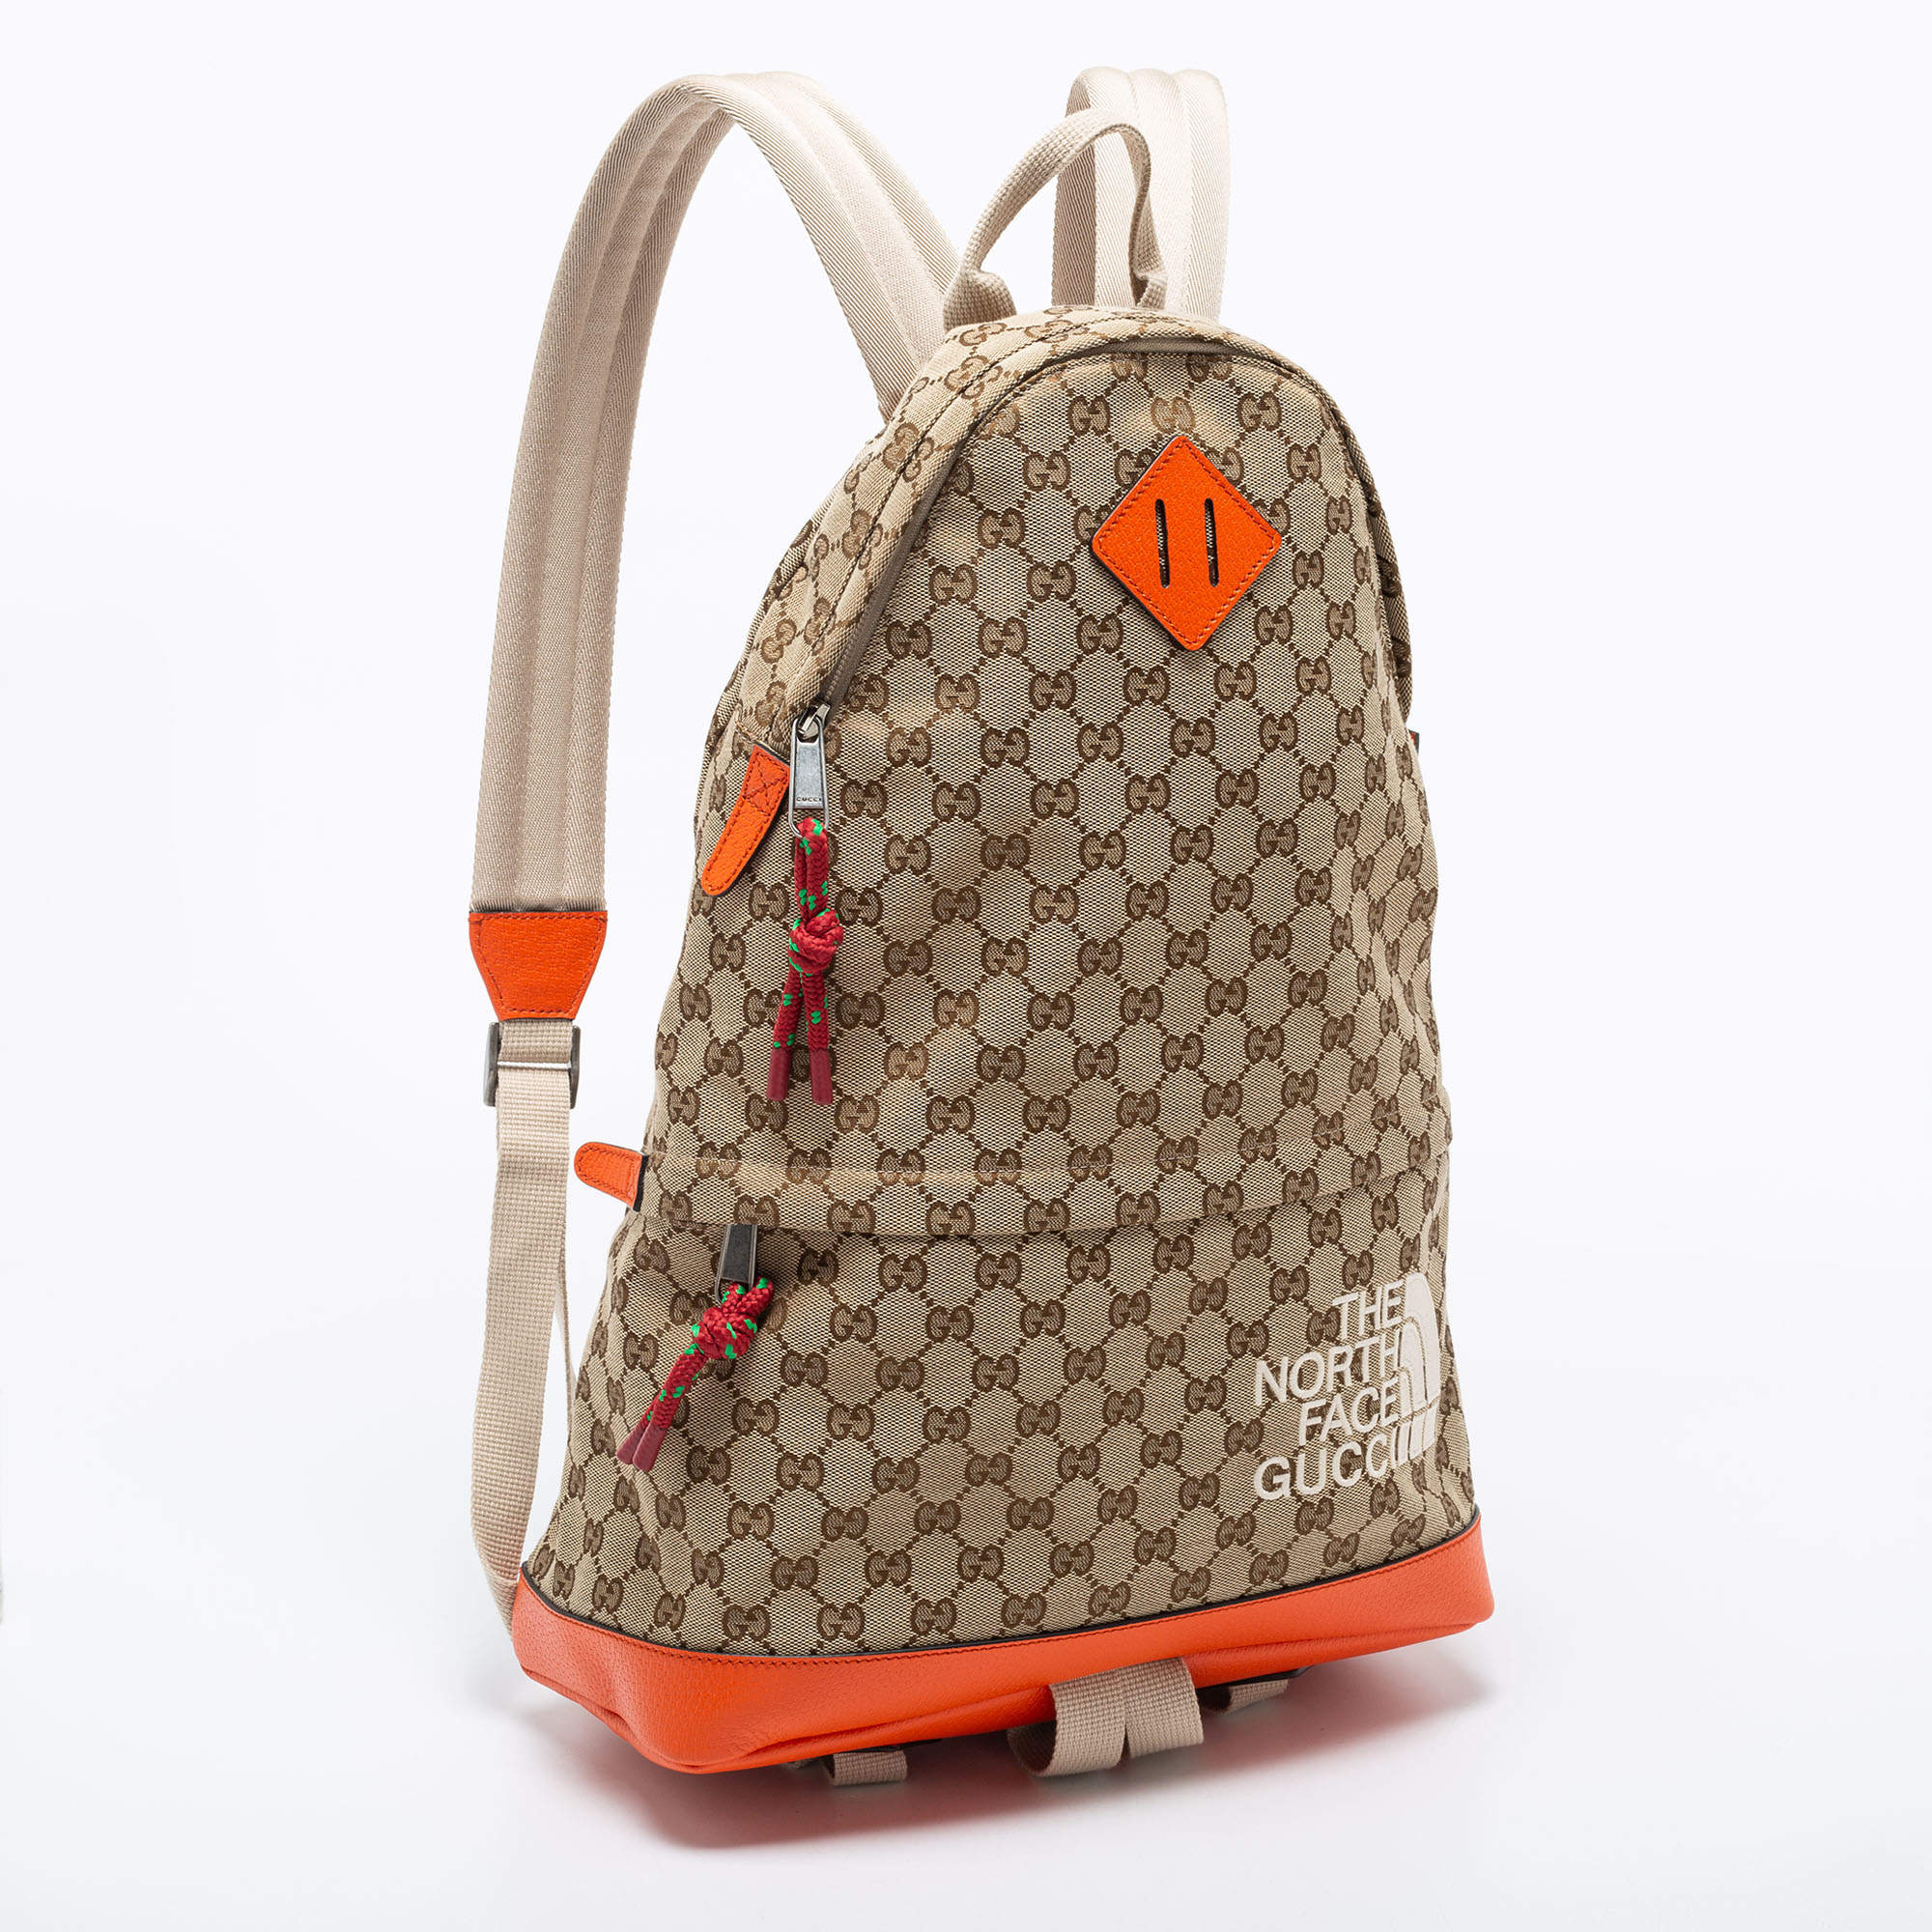 gucci bagpack - Backpacks Best Prices and Online Promos - Women's